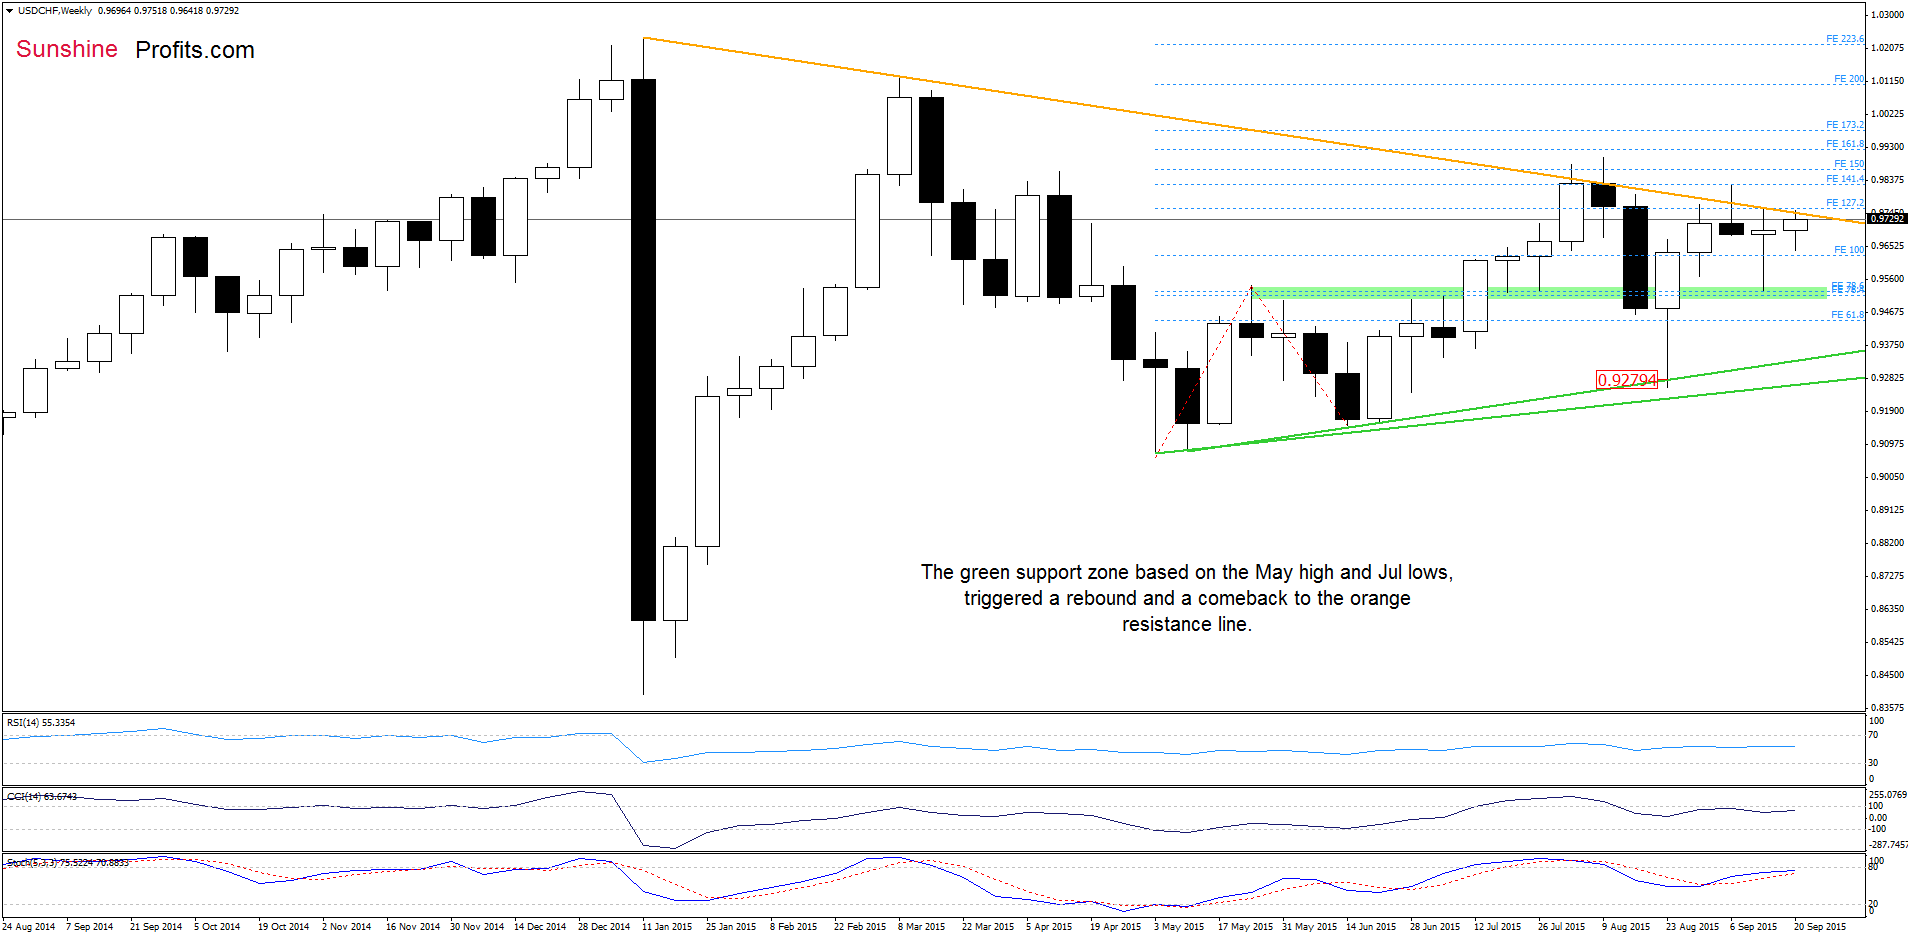 USD/CHF - the weekly chart